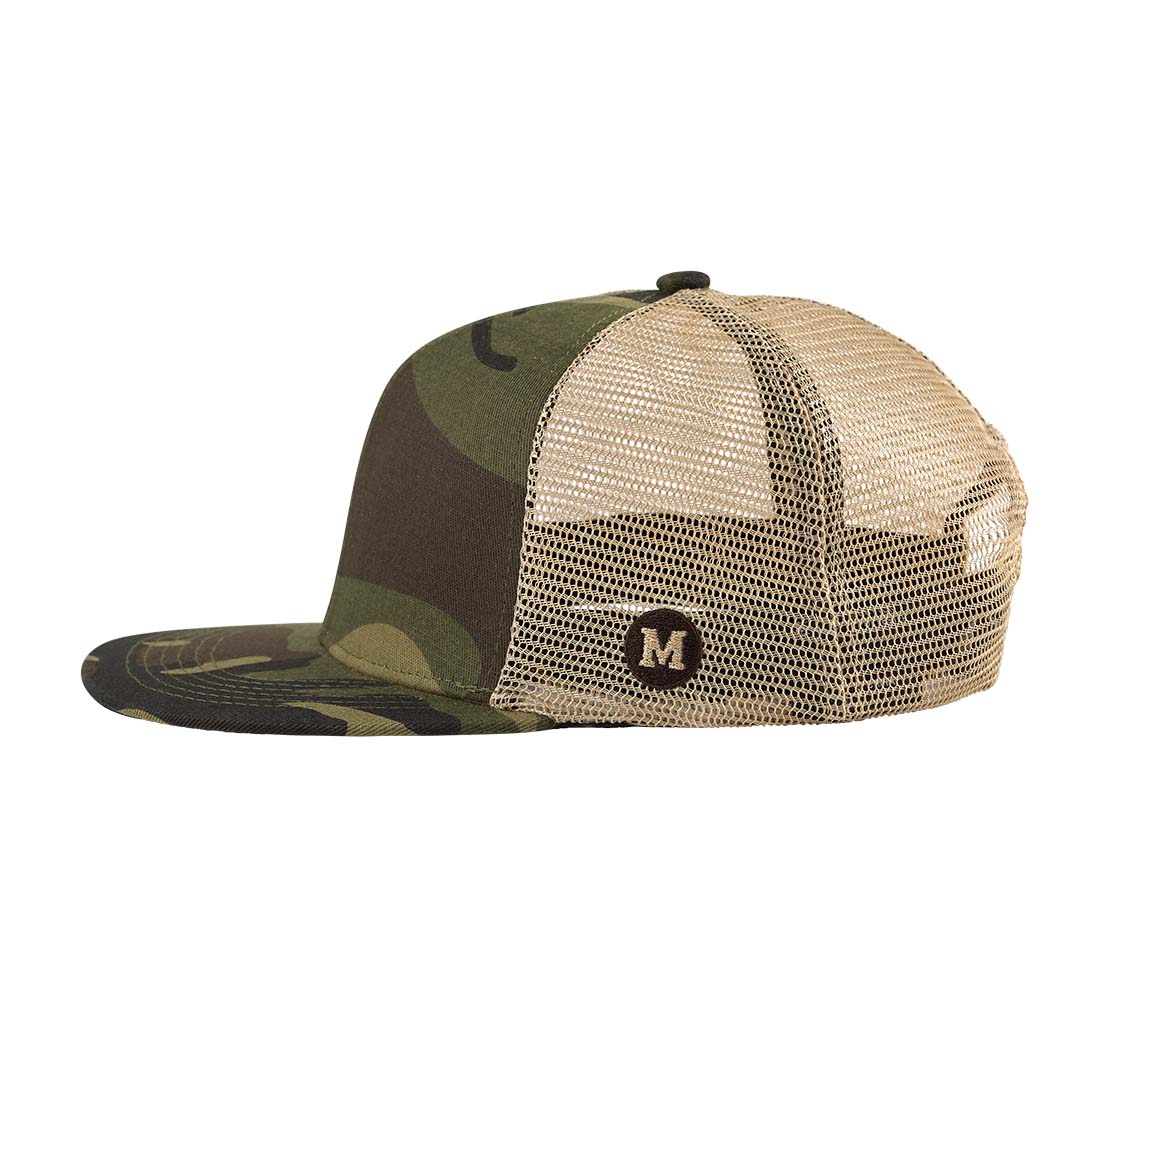 Rugged Camo Trucker Hat. Made for Big Heads!